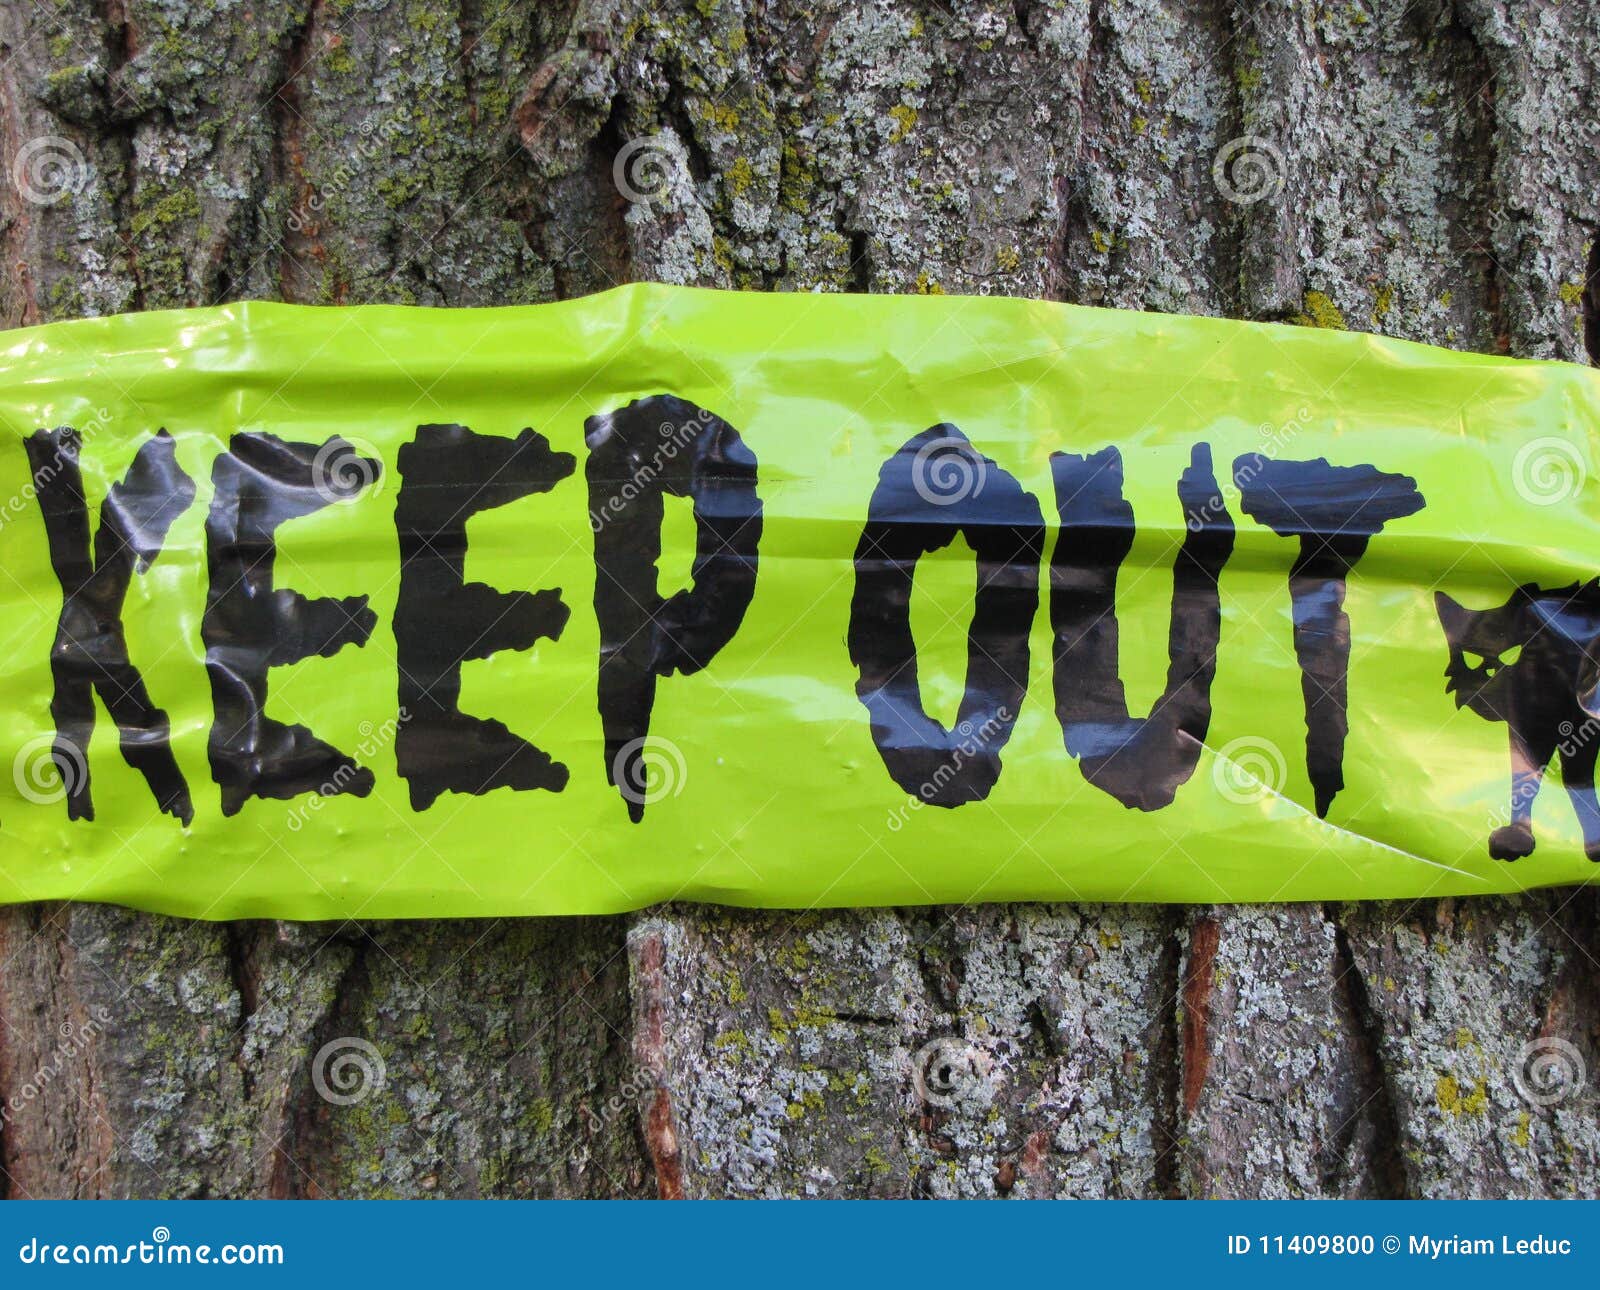 Keep Out Halloween Decoration Stock Photo - Image of spooky, tree: 11409800